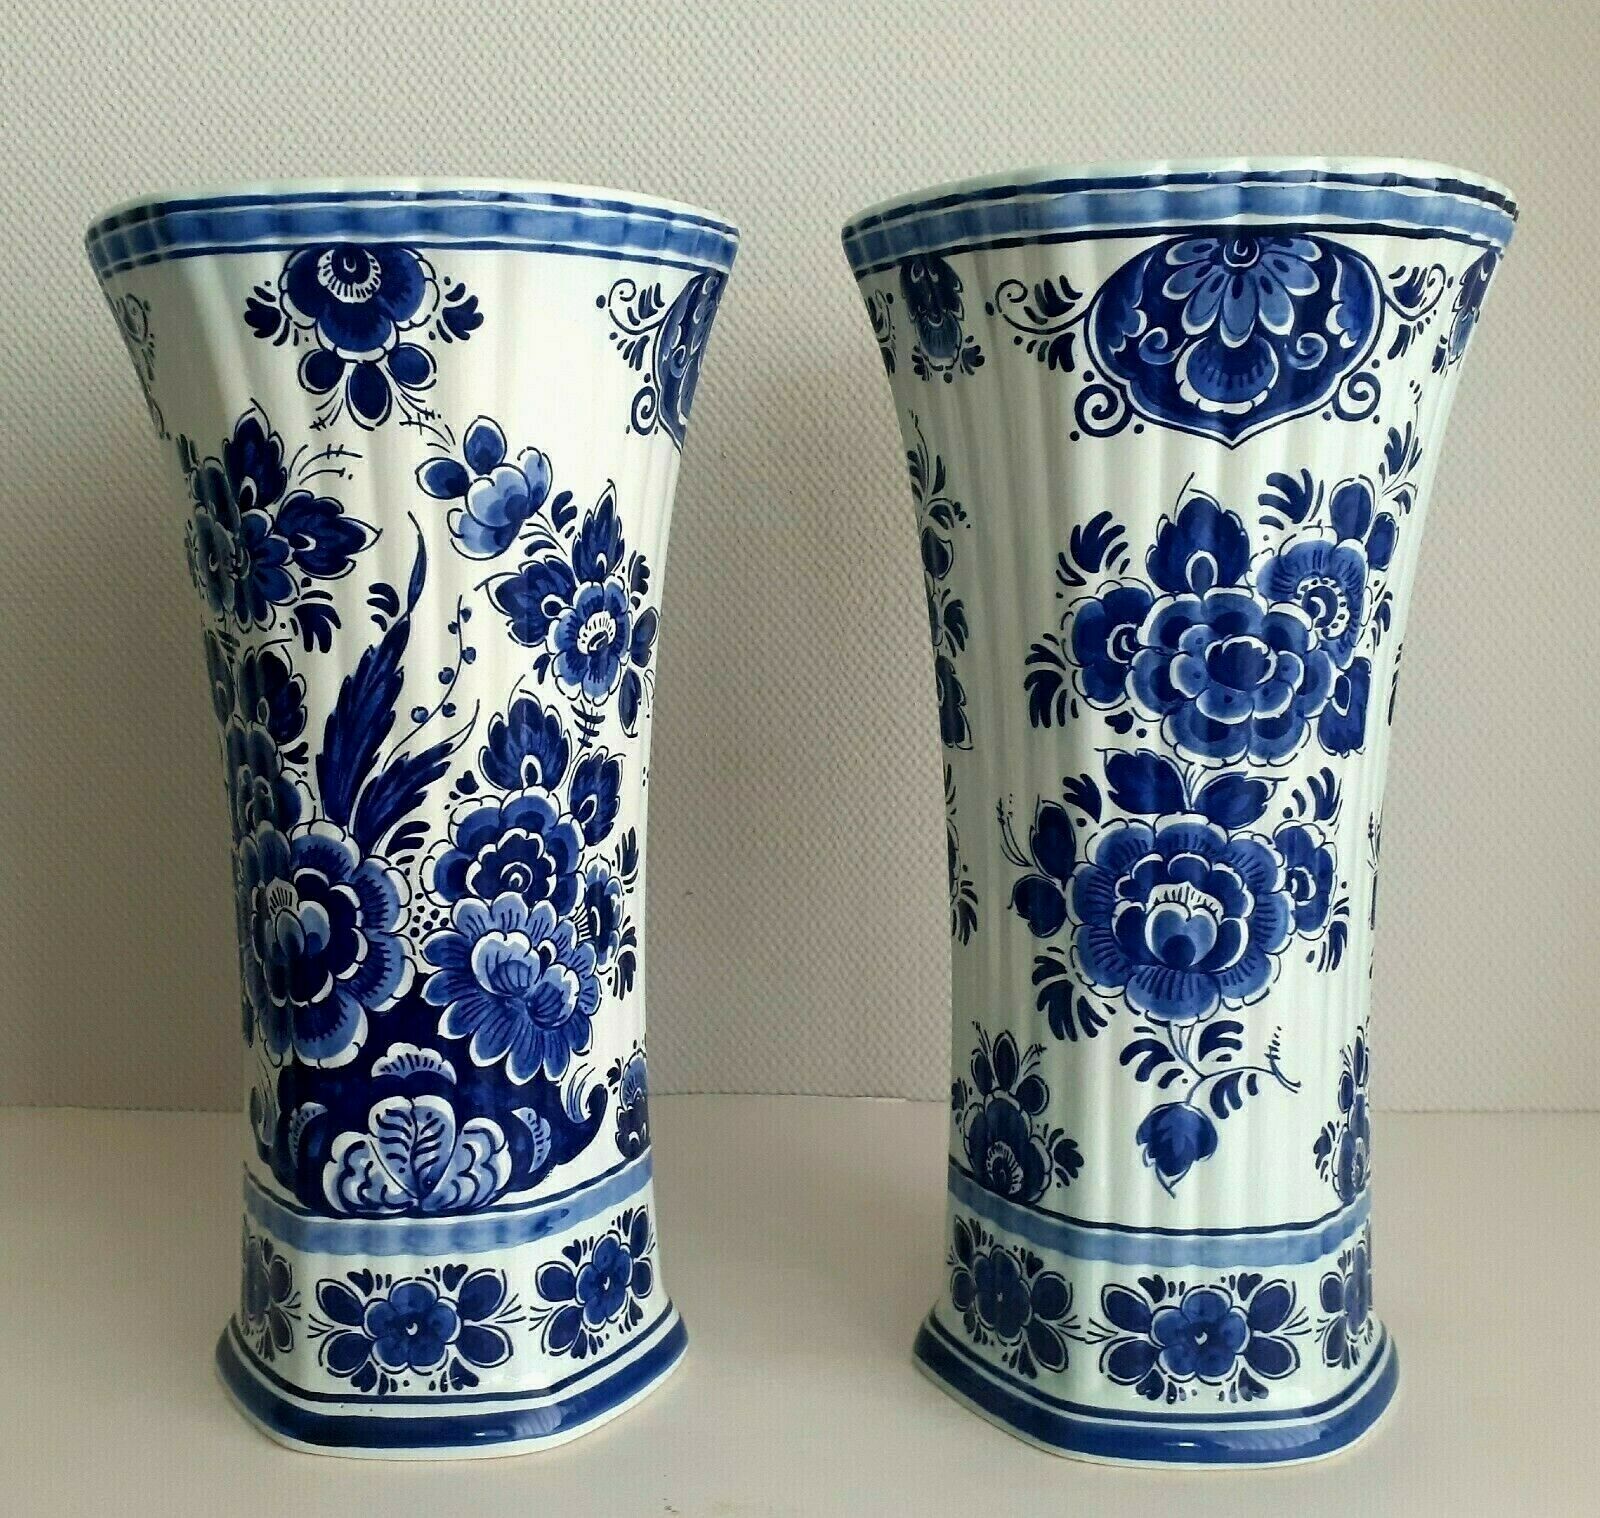 Royal Delft - Tall Cup Vase 11.8 Inches - Hand Painted